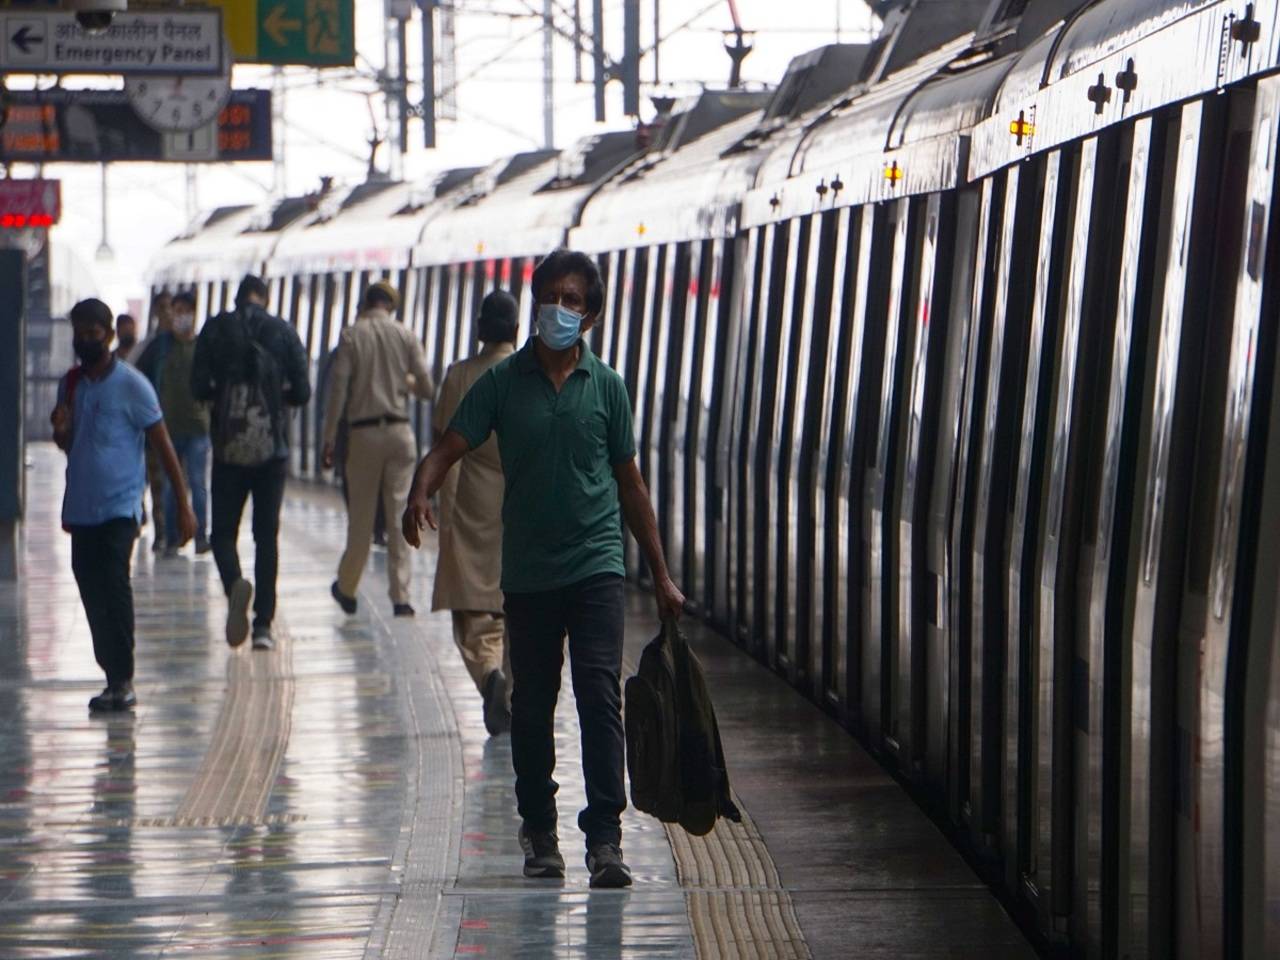 Woman attempts suicide by jumping in front of Delhi Metro train | Delhi  News - Times of India